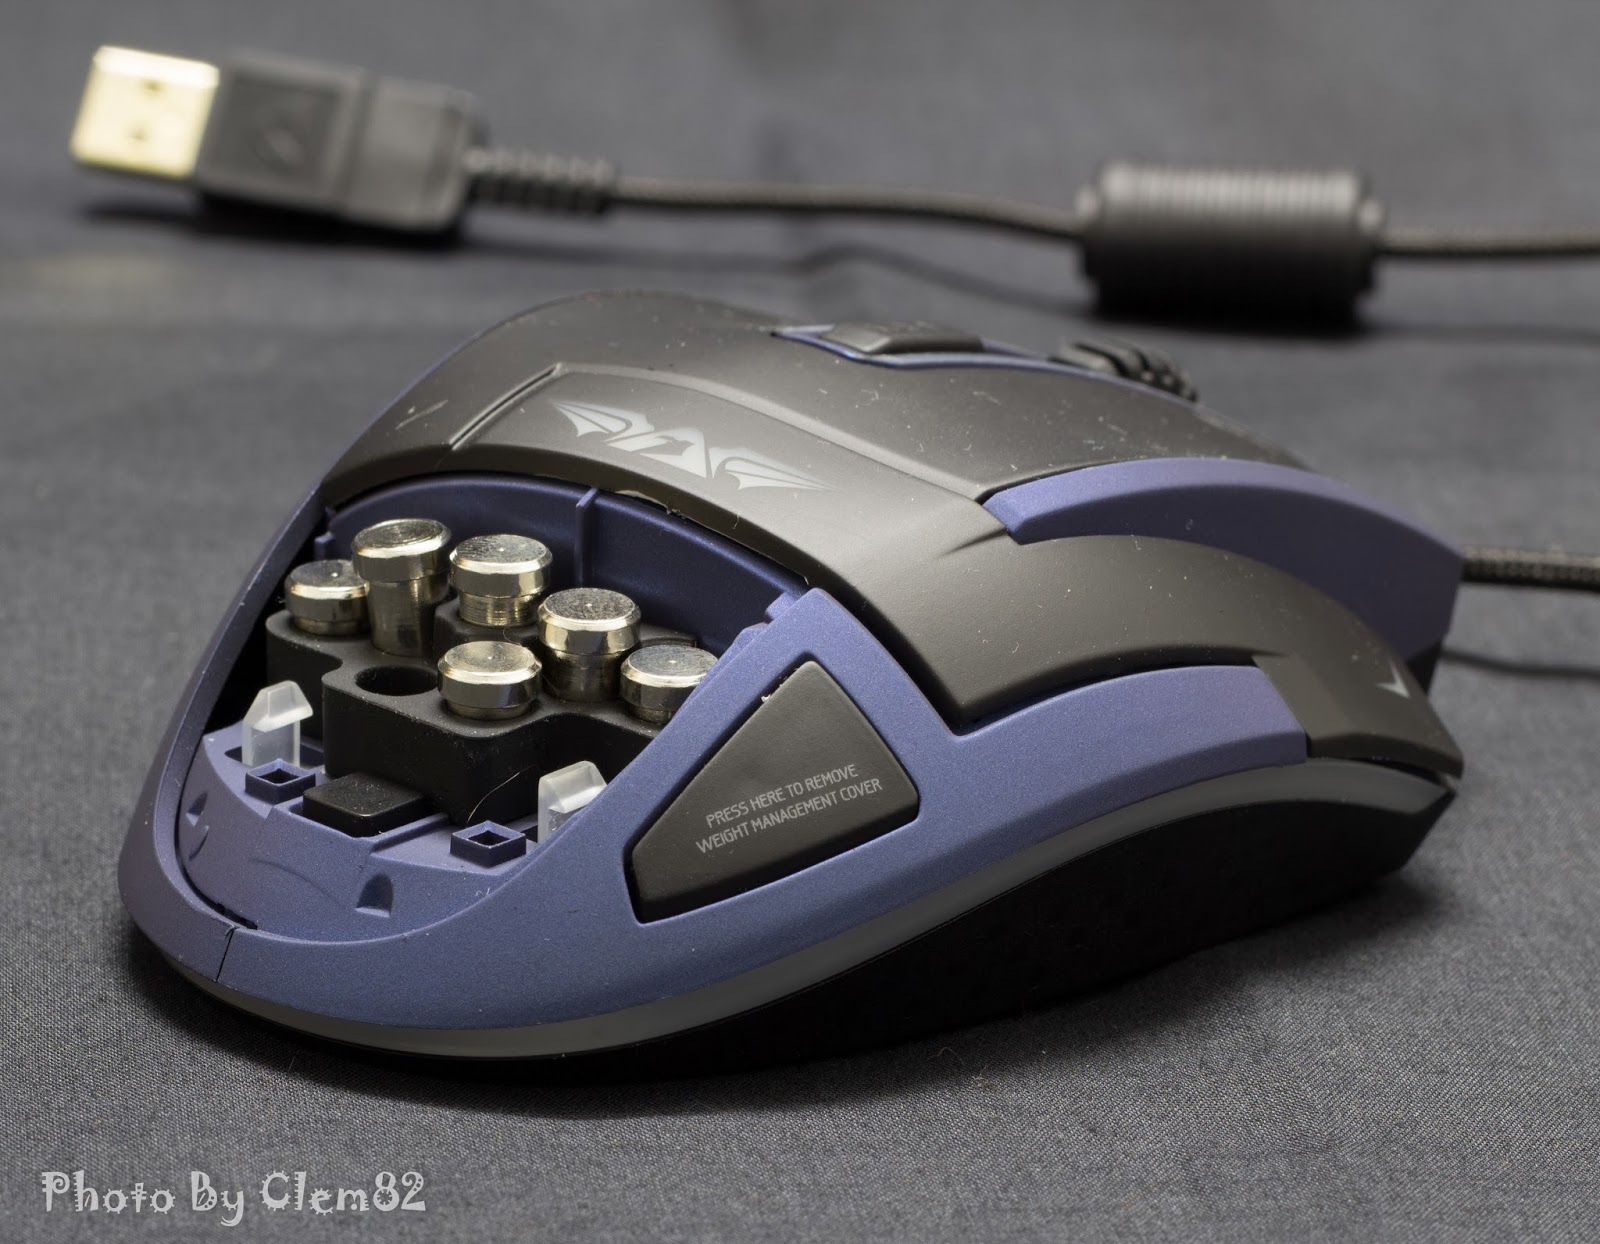 First Look & Review - Armaggeddon Alien IV G9X Optical Gaming Mouse 10